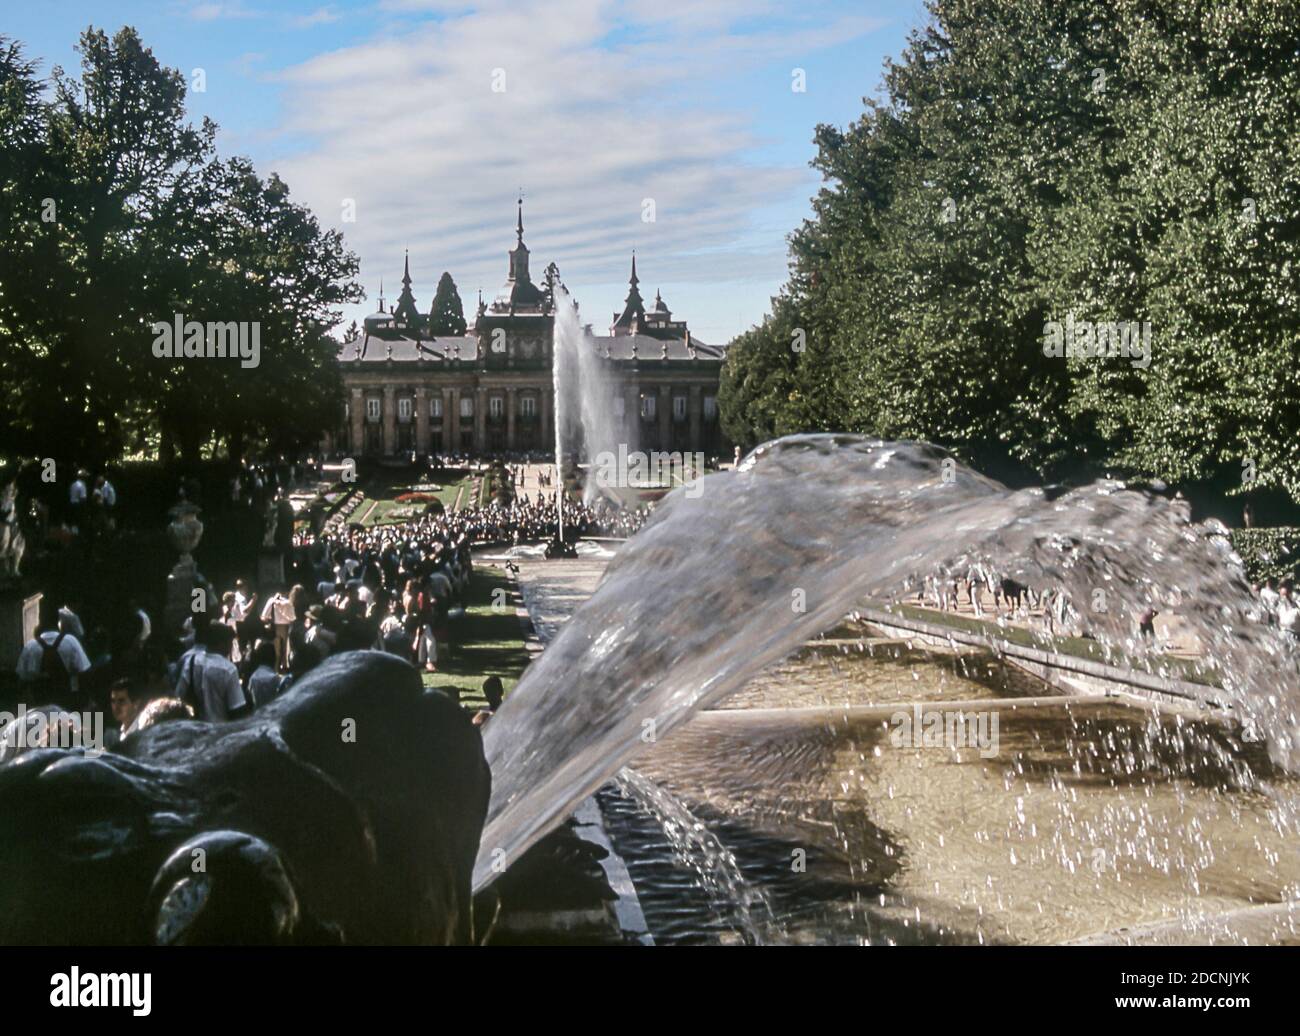 Analogue scanned photo of the fountains of the Royal Palace of La Granja de San Ildefonso in the town of Segovia, Castile and Leon, Spain, Europe Stock Photo